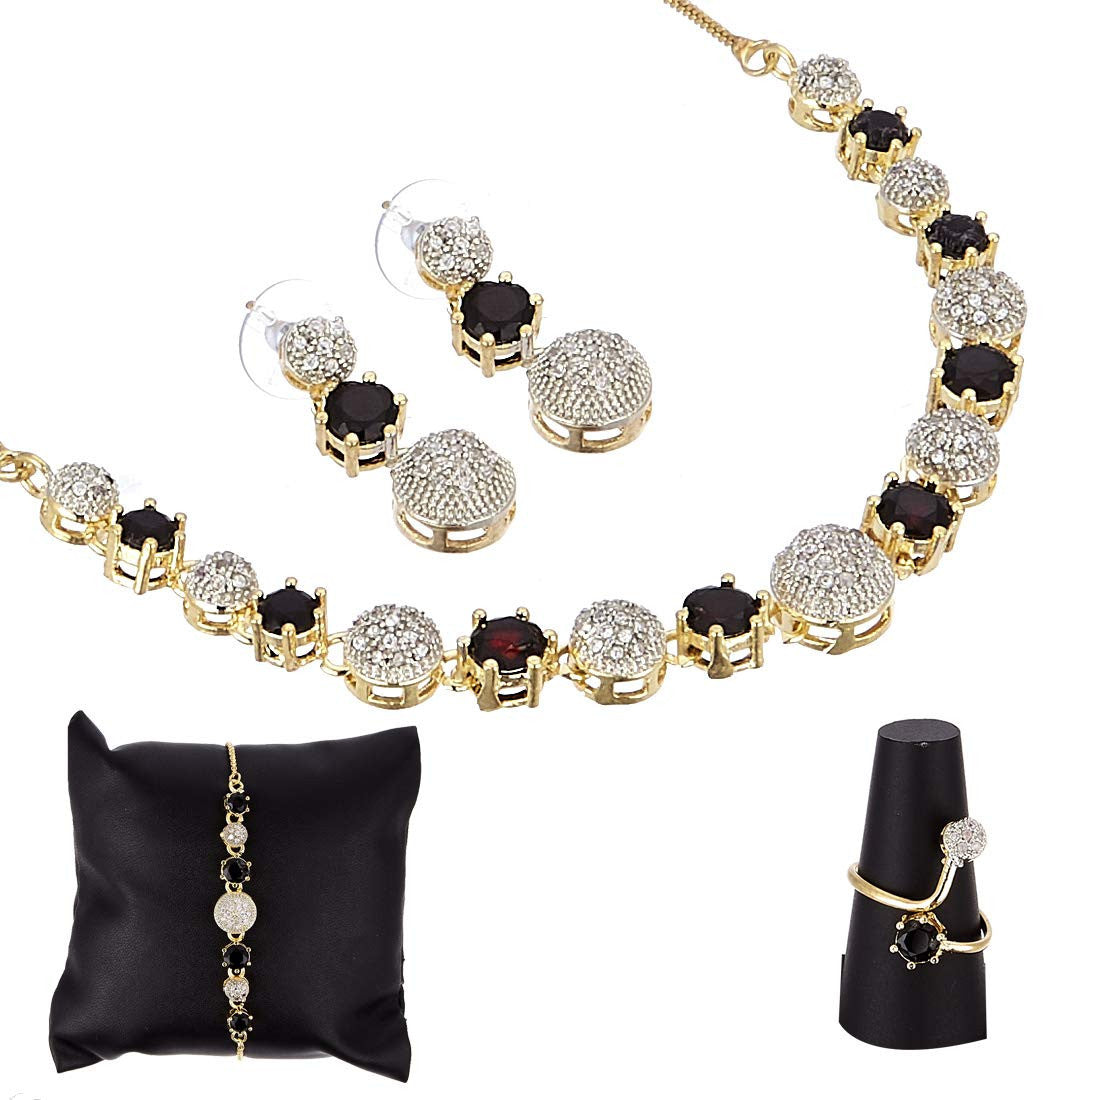 Necklace With earrings,Maangtika and bracelet | Buy Jewelelry set online from mekkna